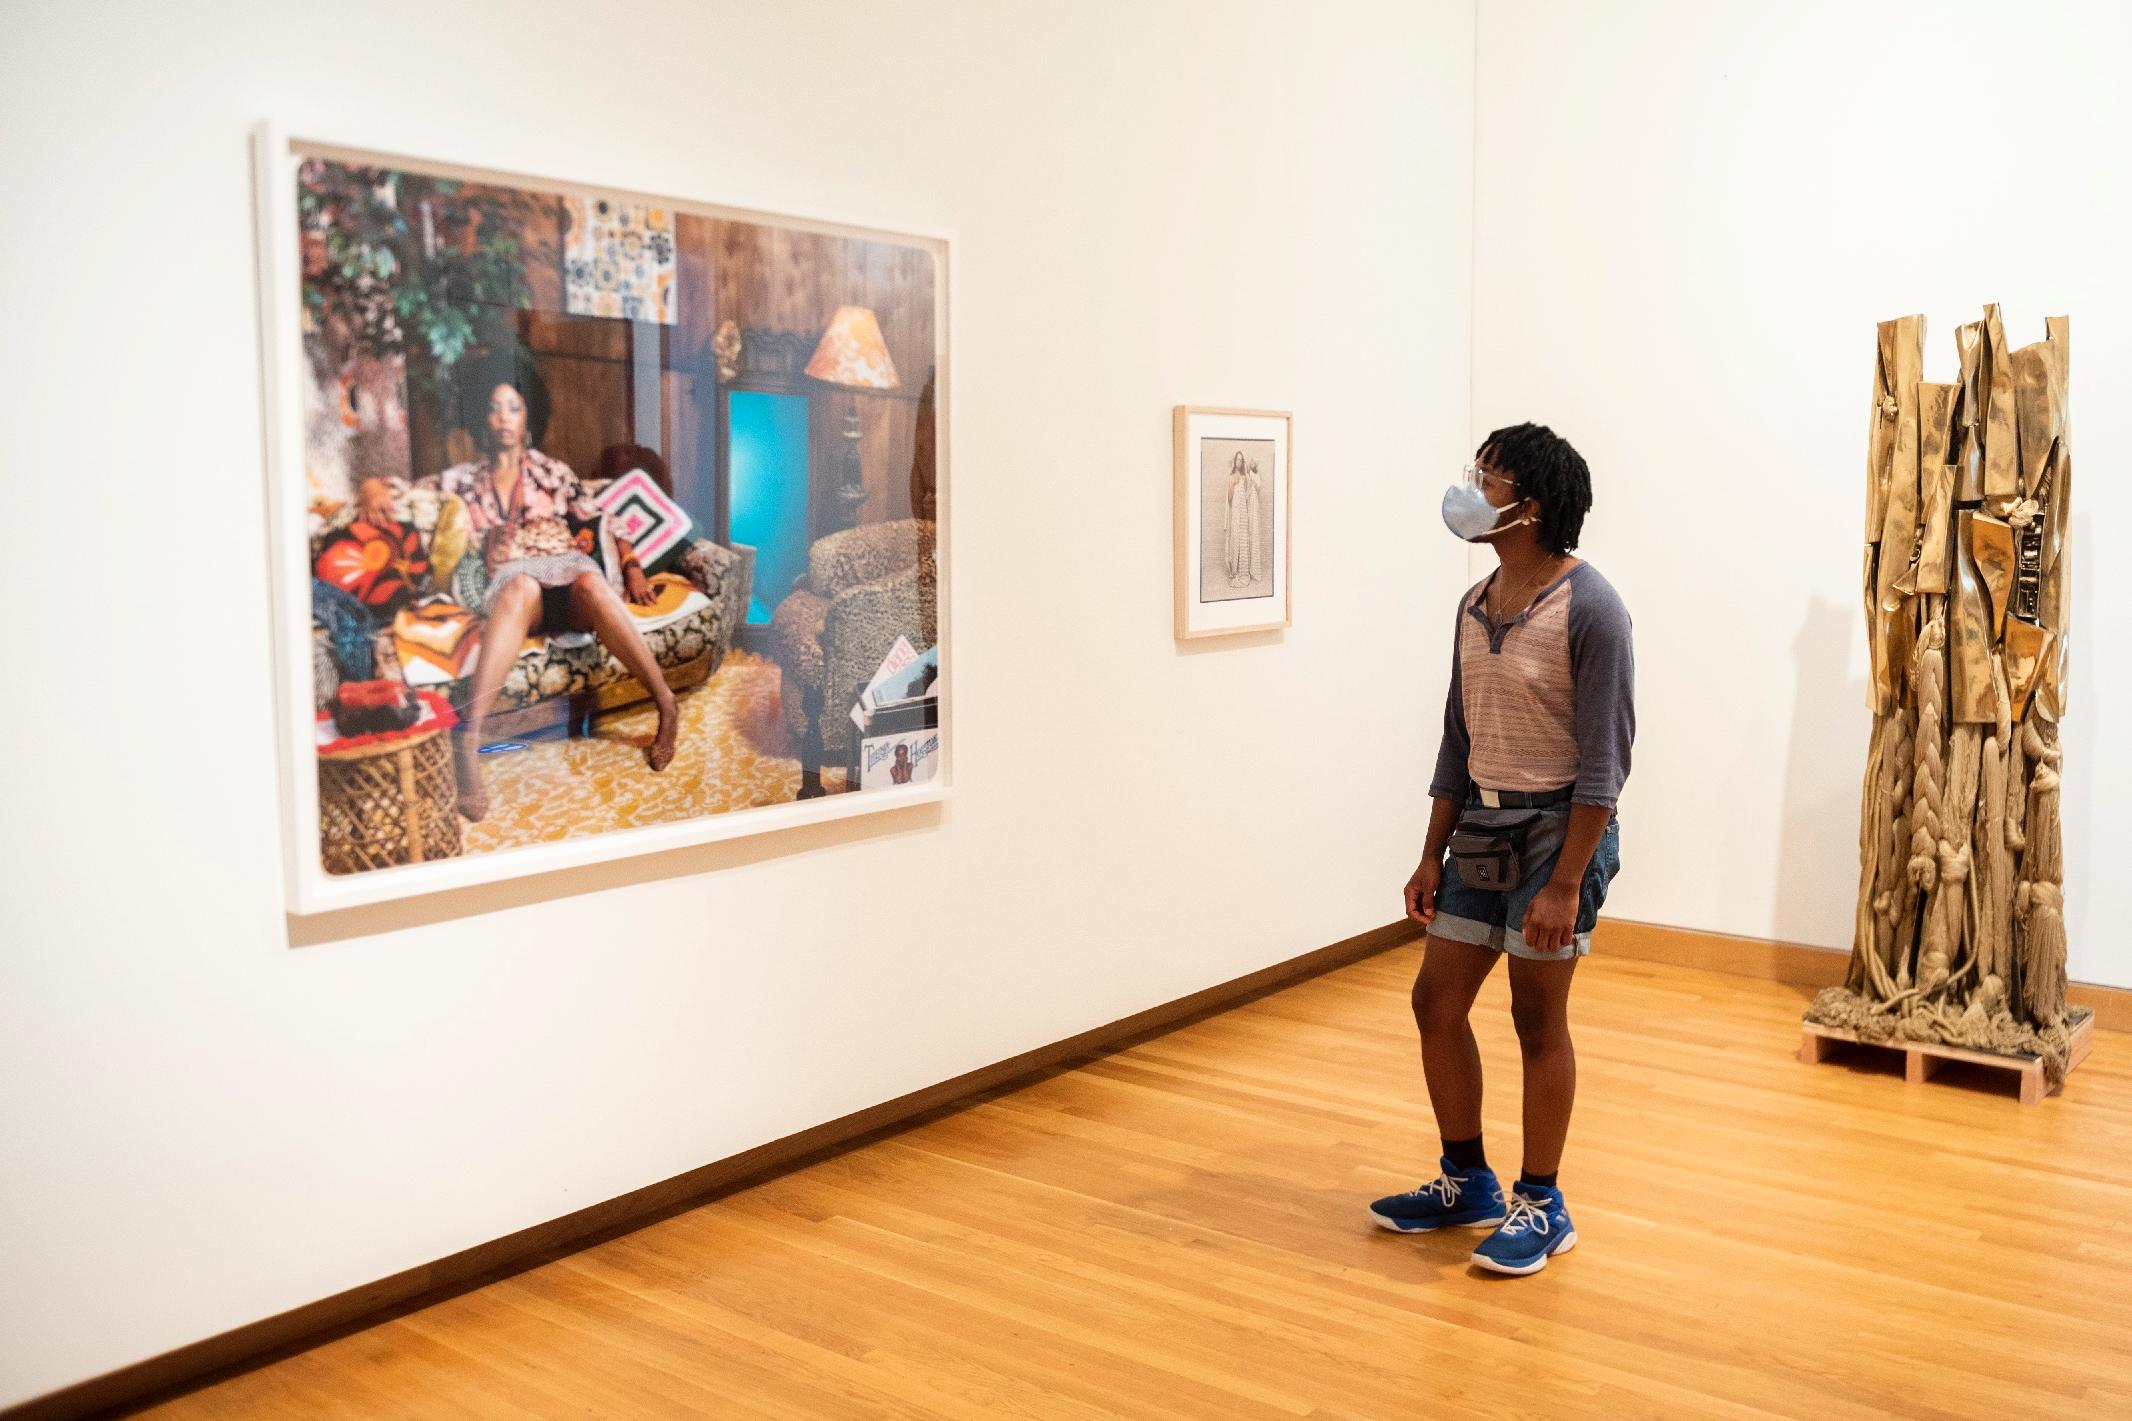 Visitor takes in new exhi bition at the Nasher